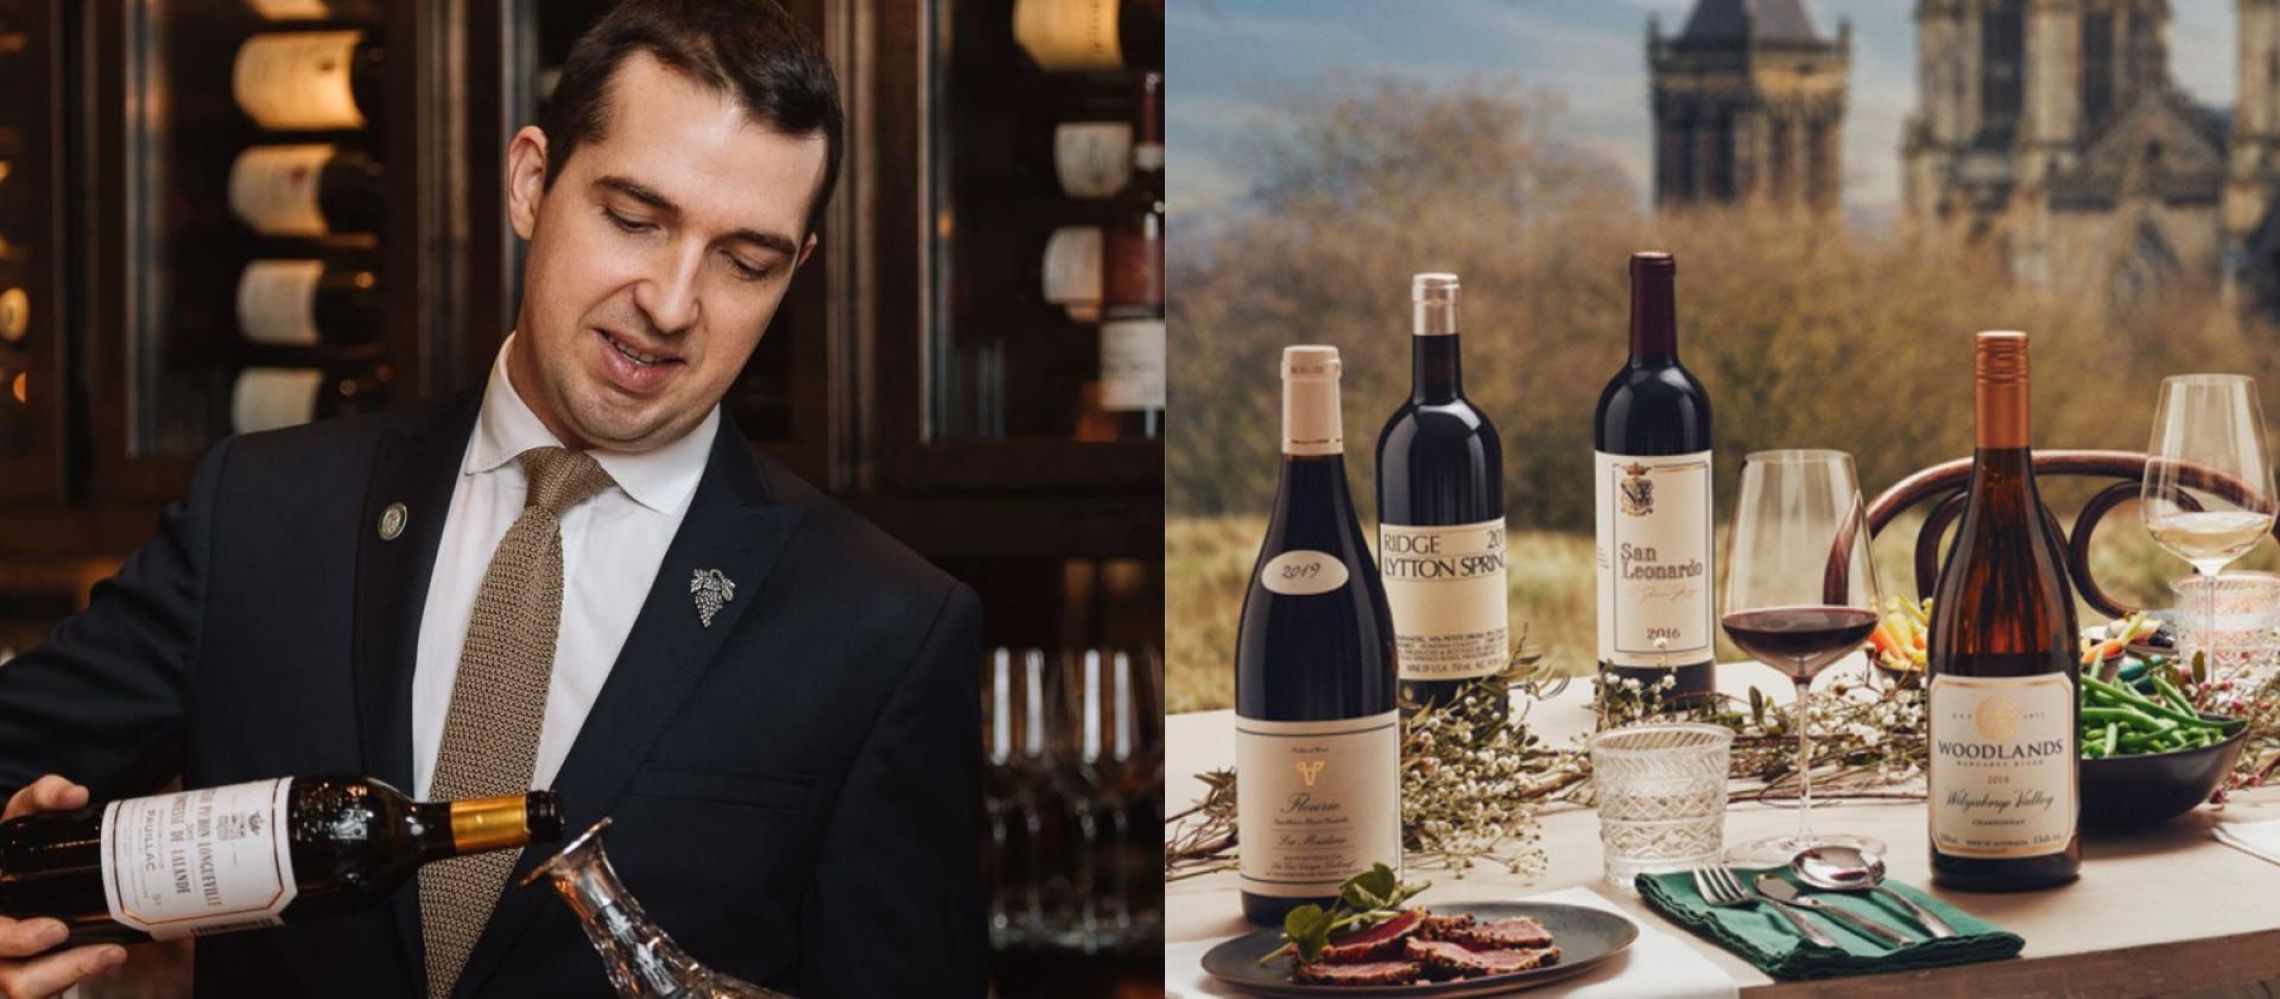 Photo for: Svetoslav Manolev MS Joins London Wine Competition Judging Panel